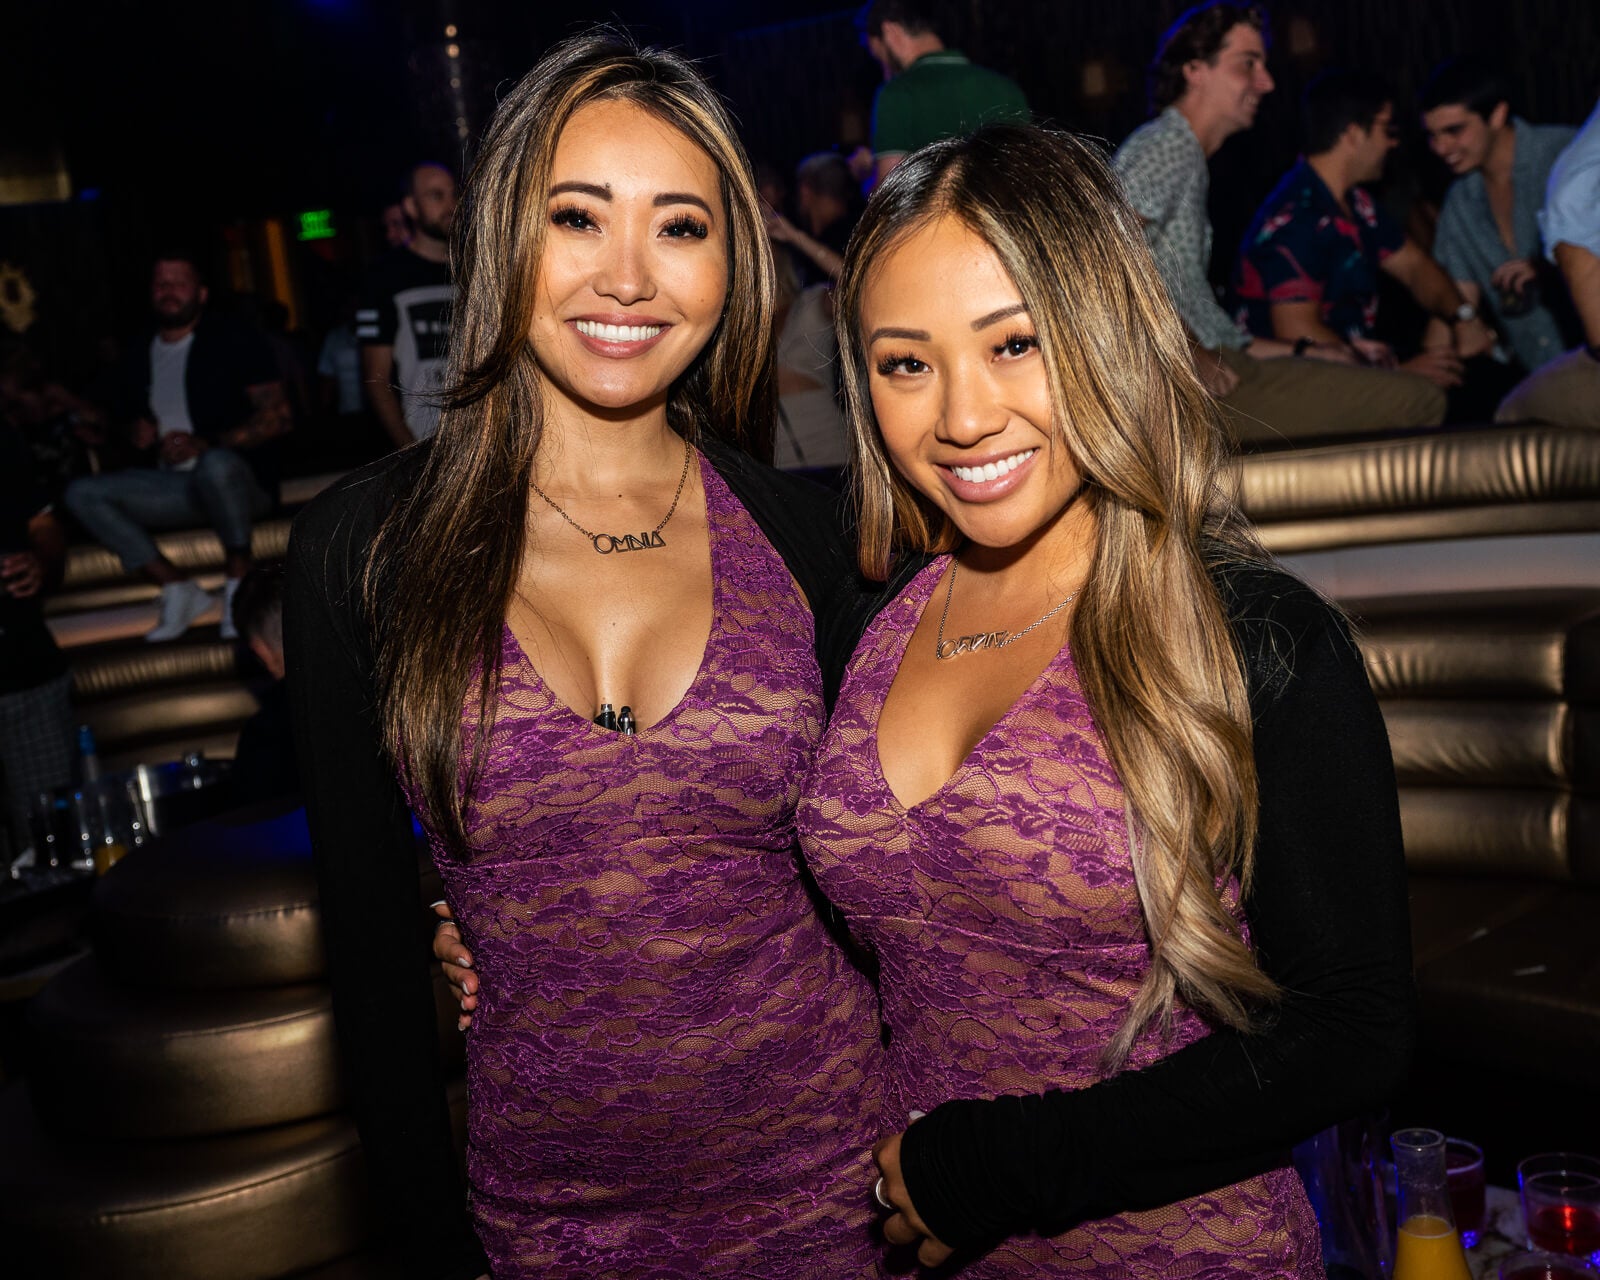 Cocktail Waitresses at OMNIA